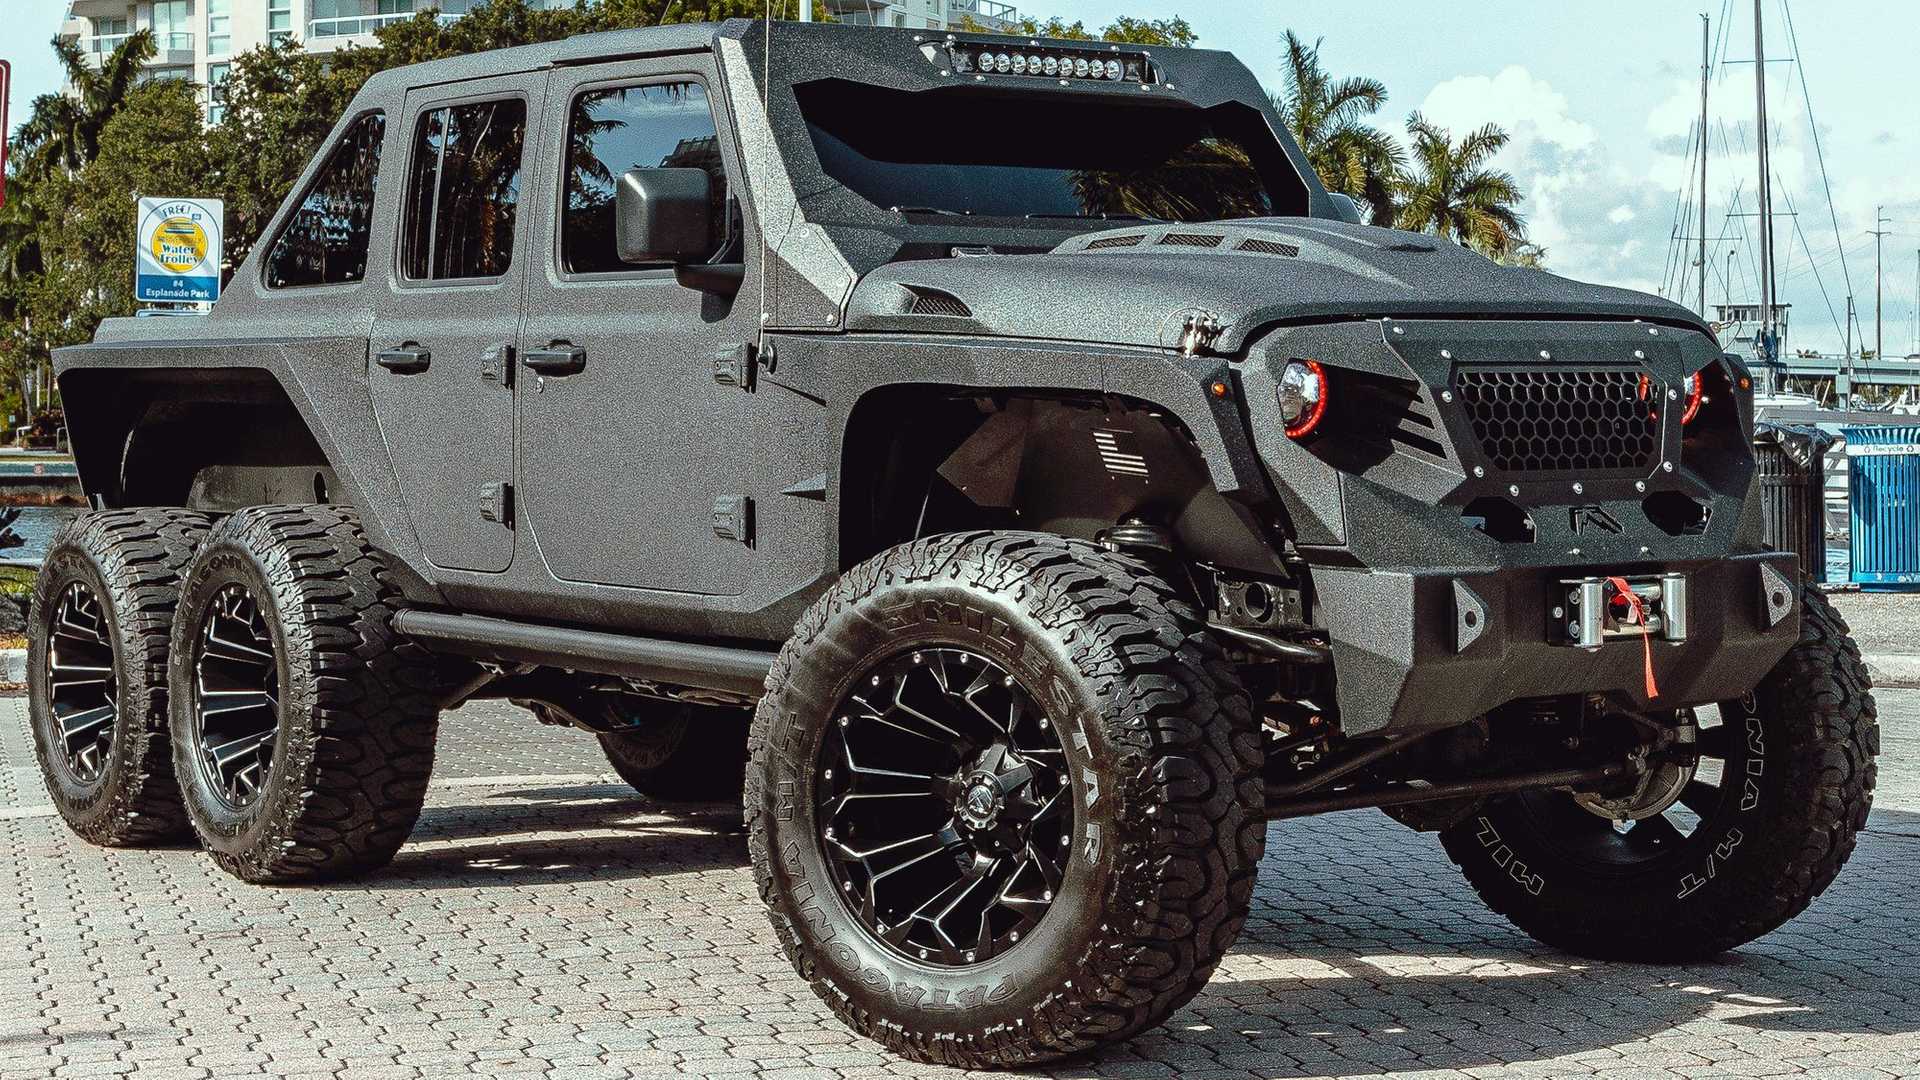 The monstrous Apocalypse Hellfire 6x6 truck meant to survive zombie attack  gets well-deserved screen time on Jay Leno's car show - Luxurylaunches